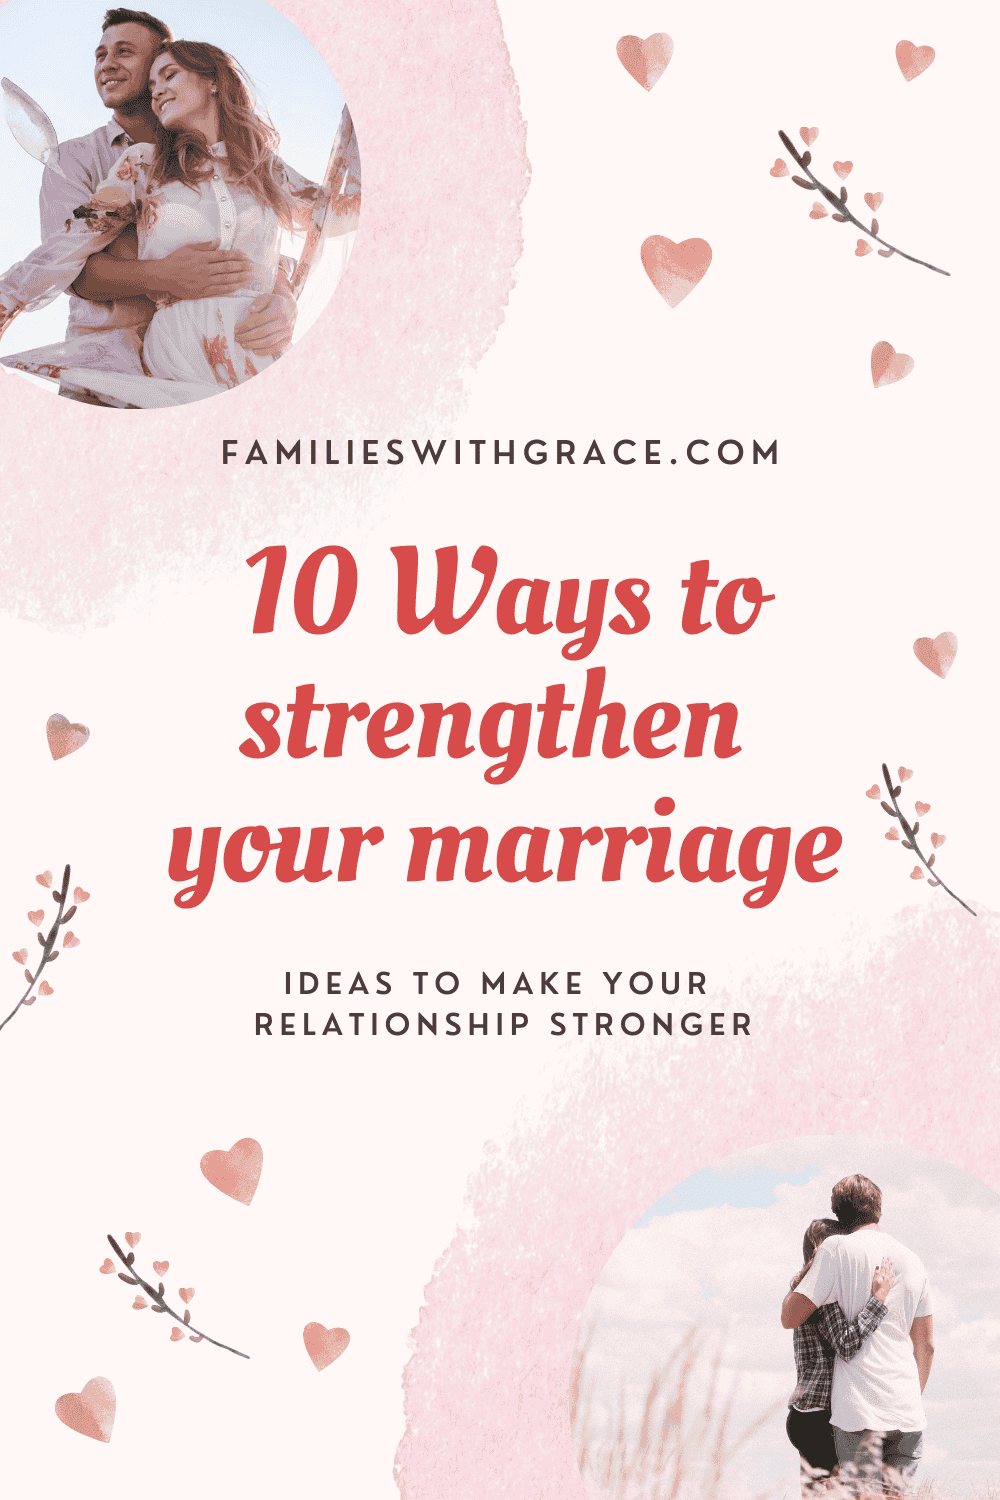 10 Ways to strengthen your marriage